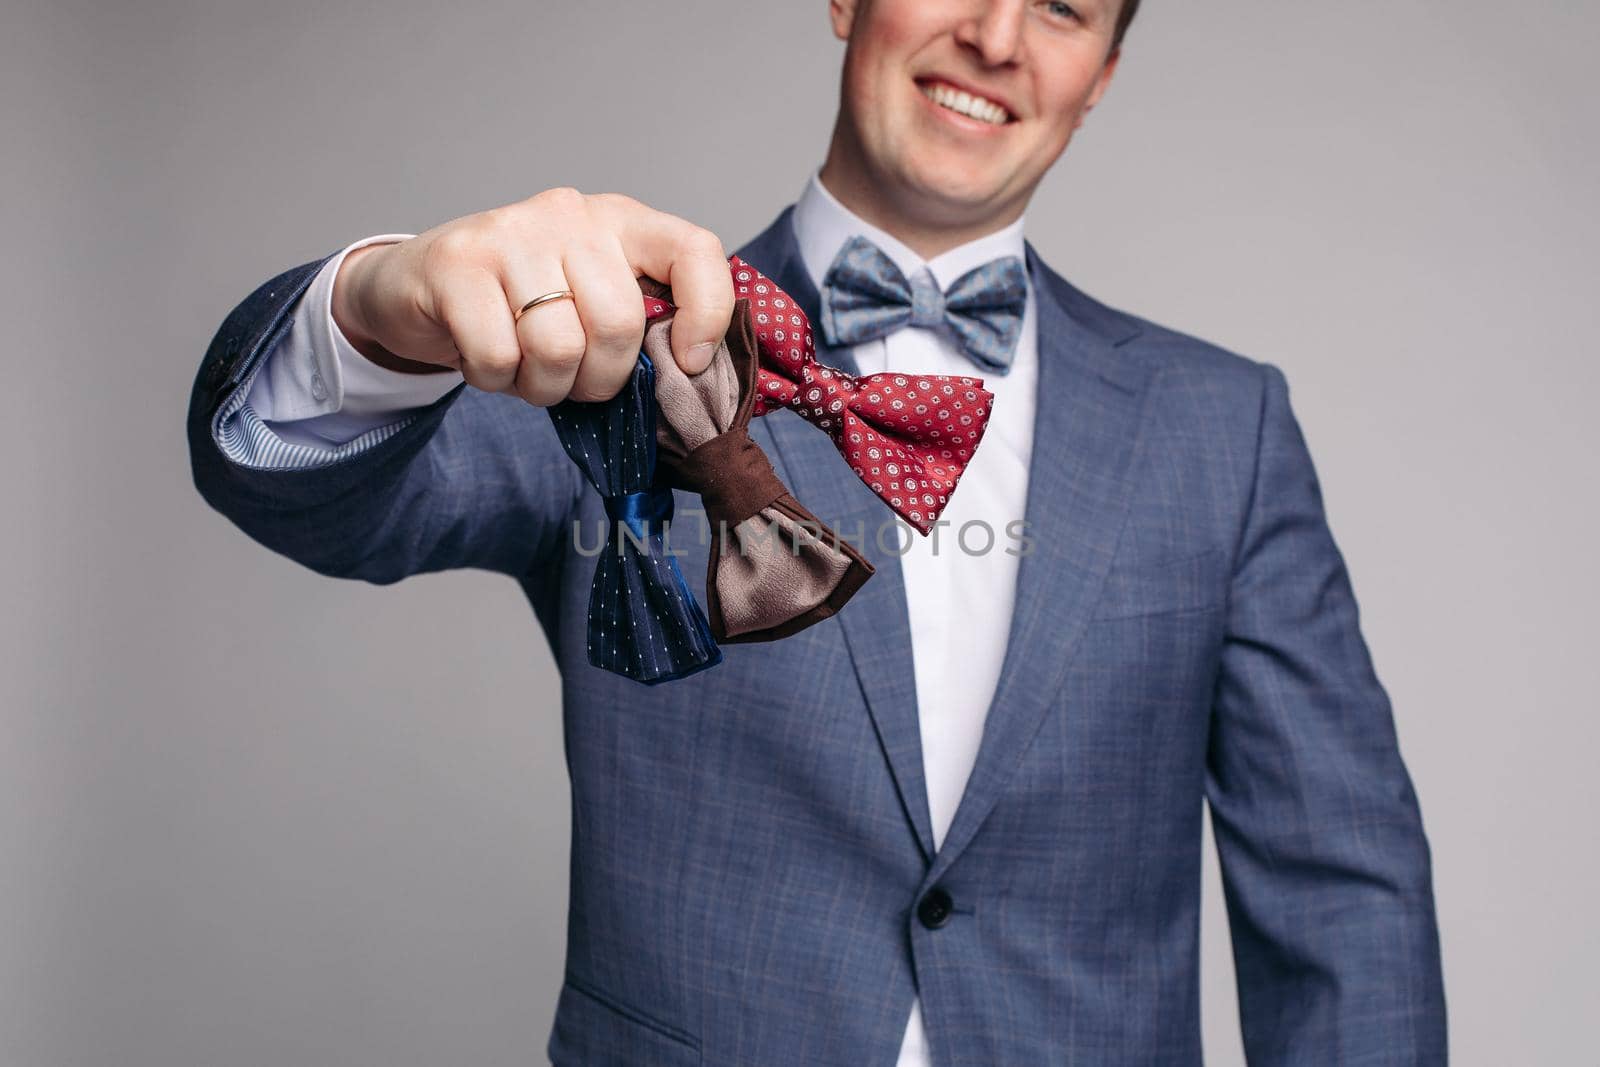 Smiling man insmart suit keeping bow ties in hand by StudioLucky